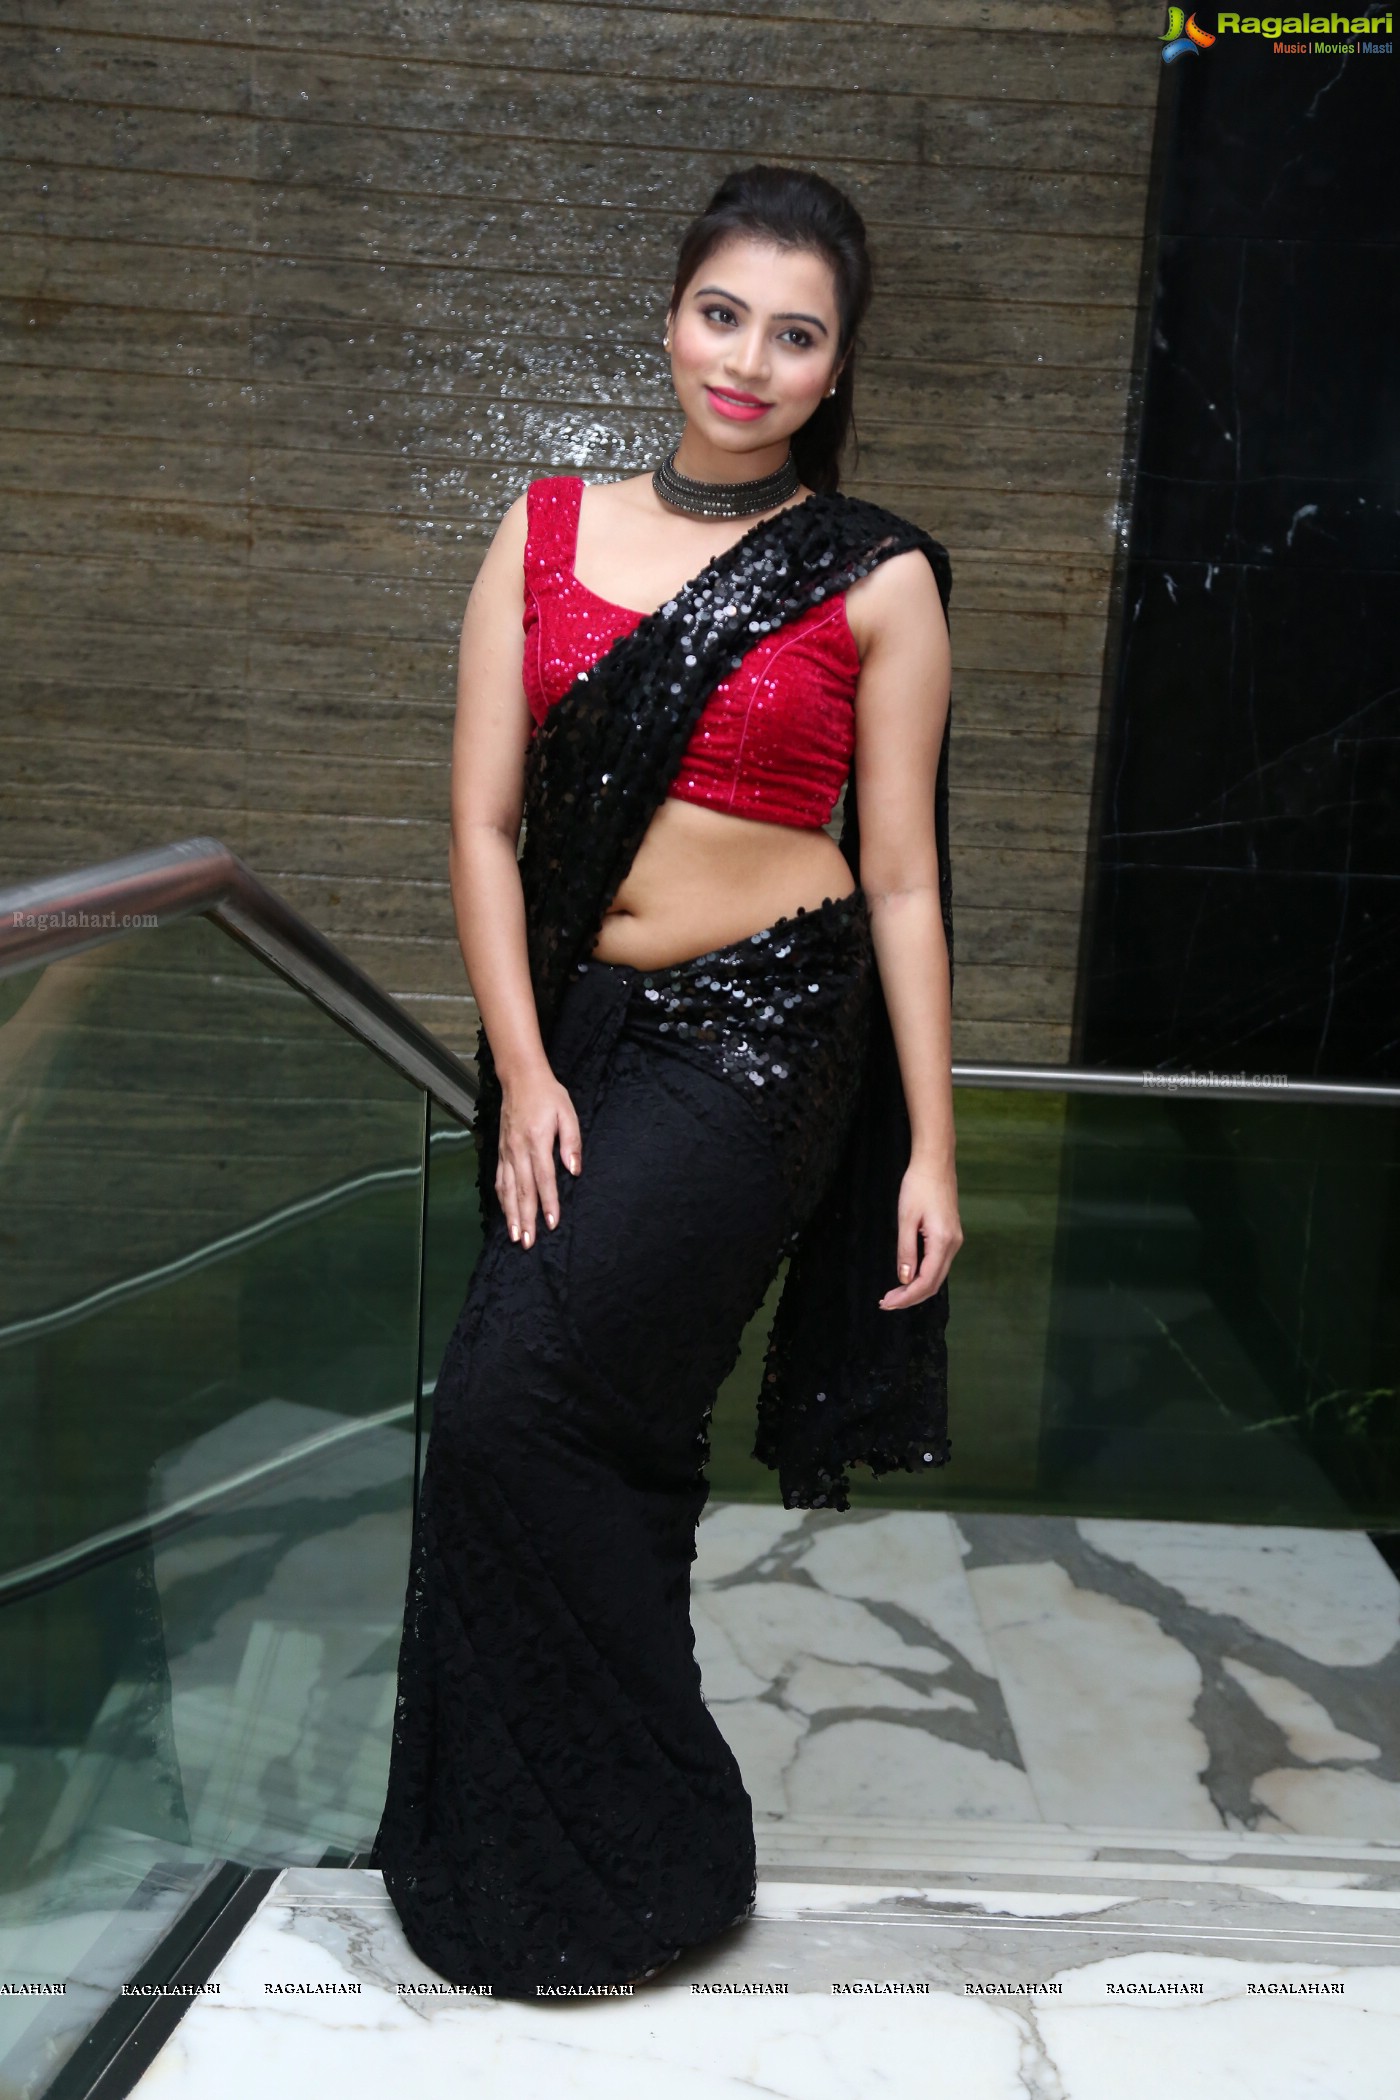 Priyanka Raman at Queens Lounge Event (Posters)